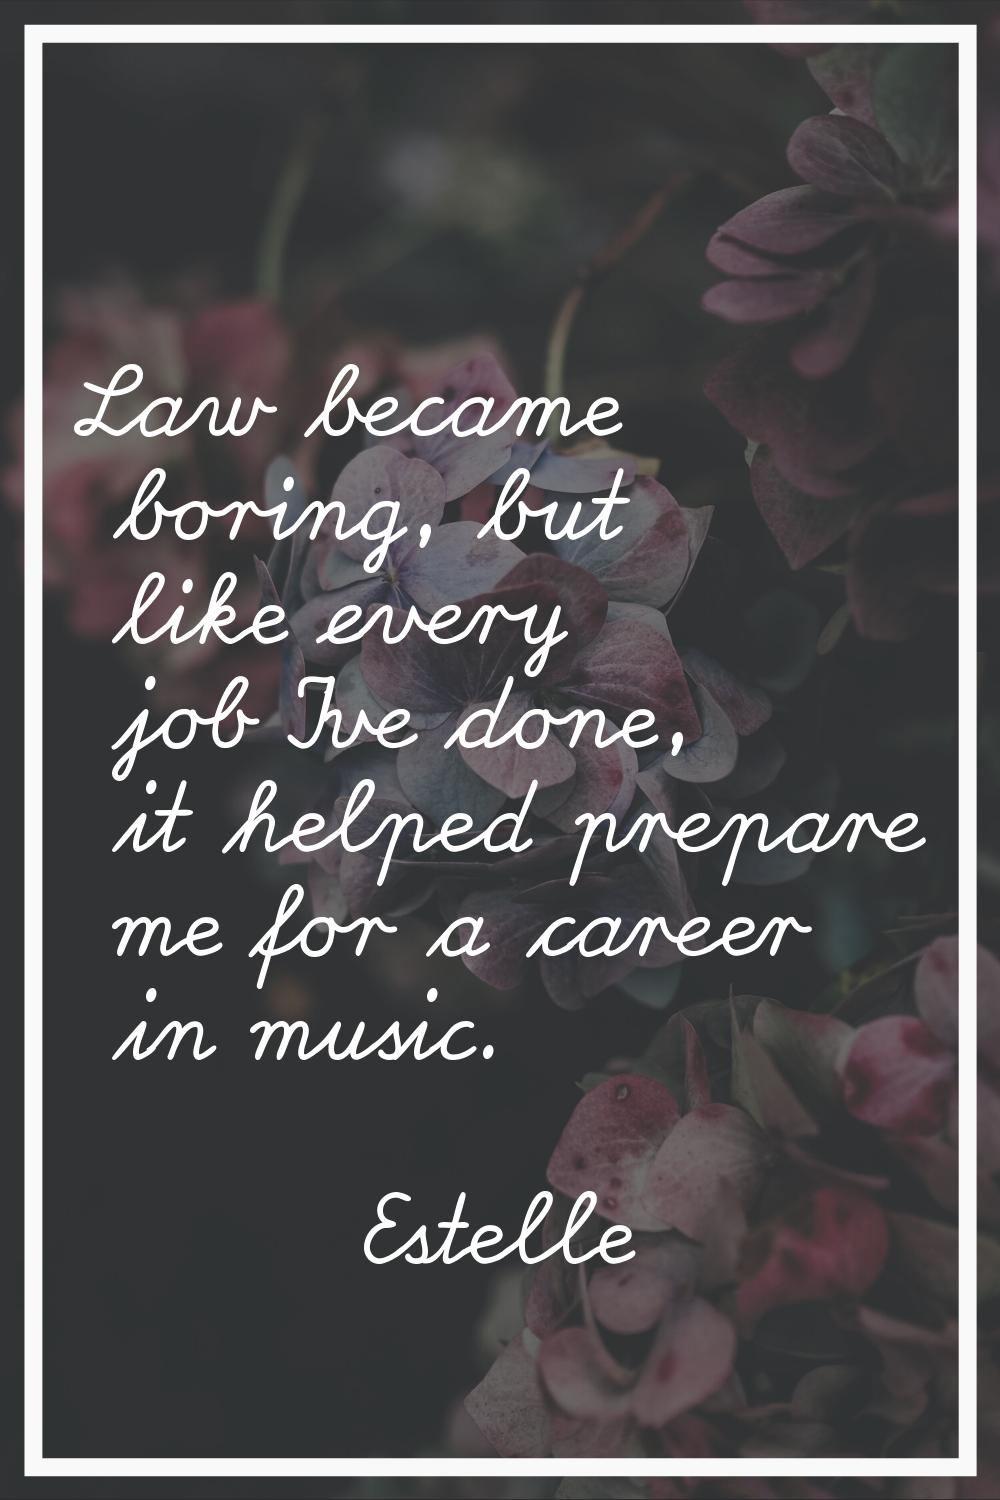 Law became boring, but like every job I've done, it helped prepare me for a career in music.